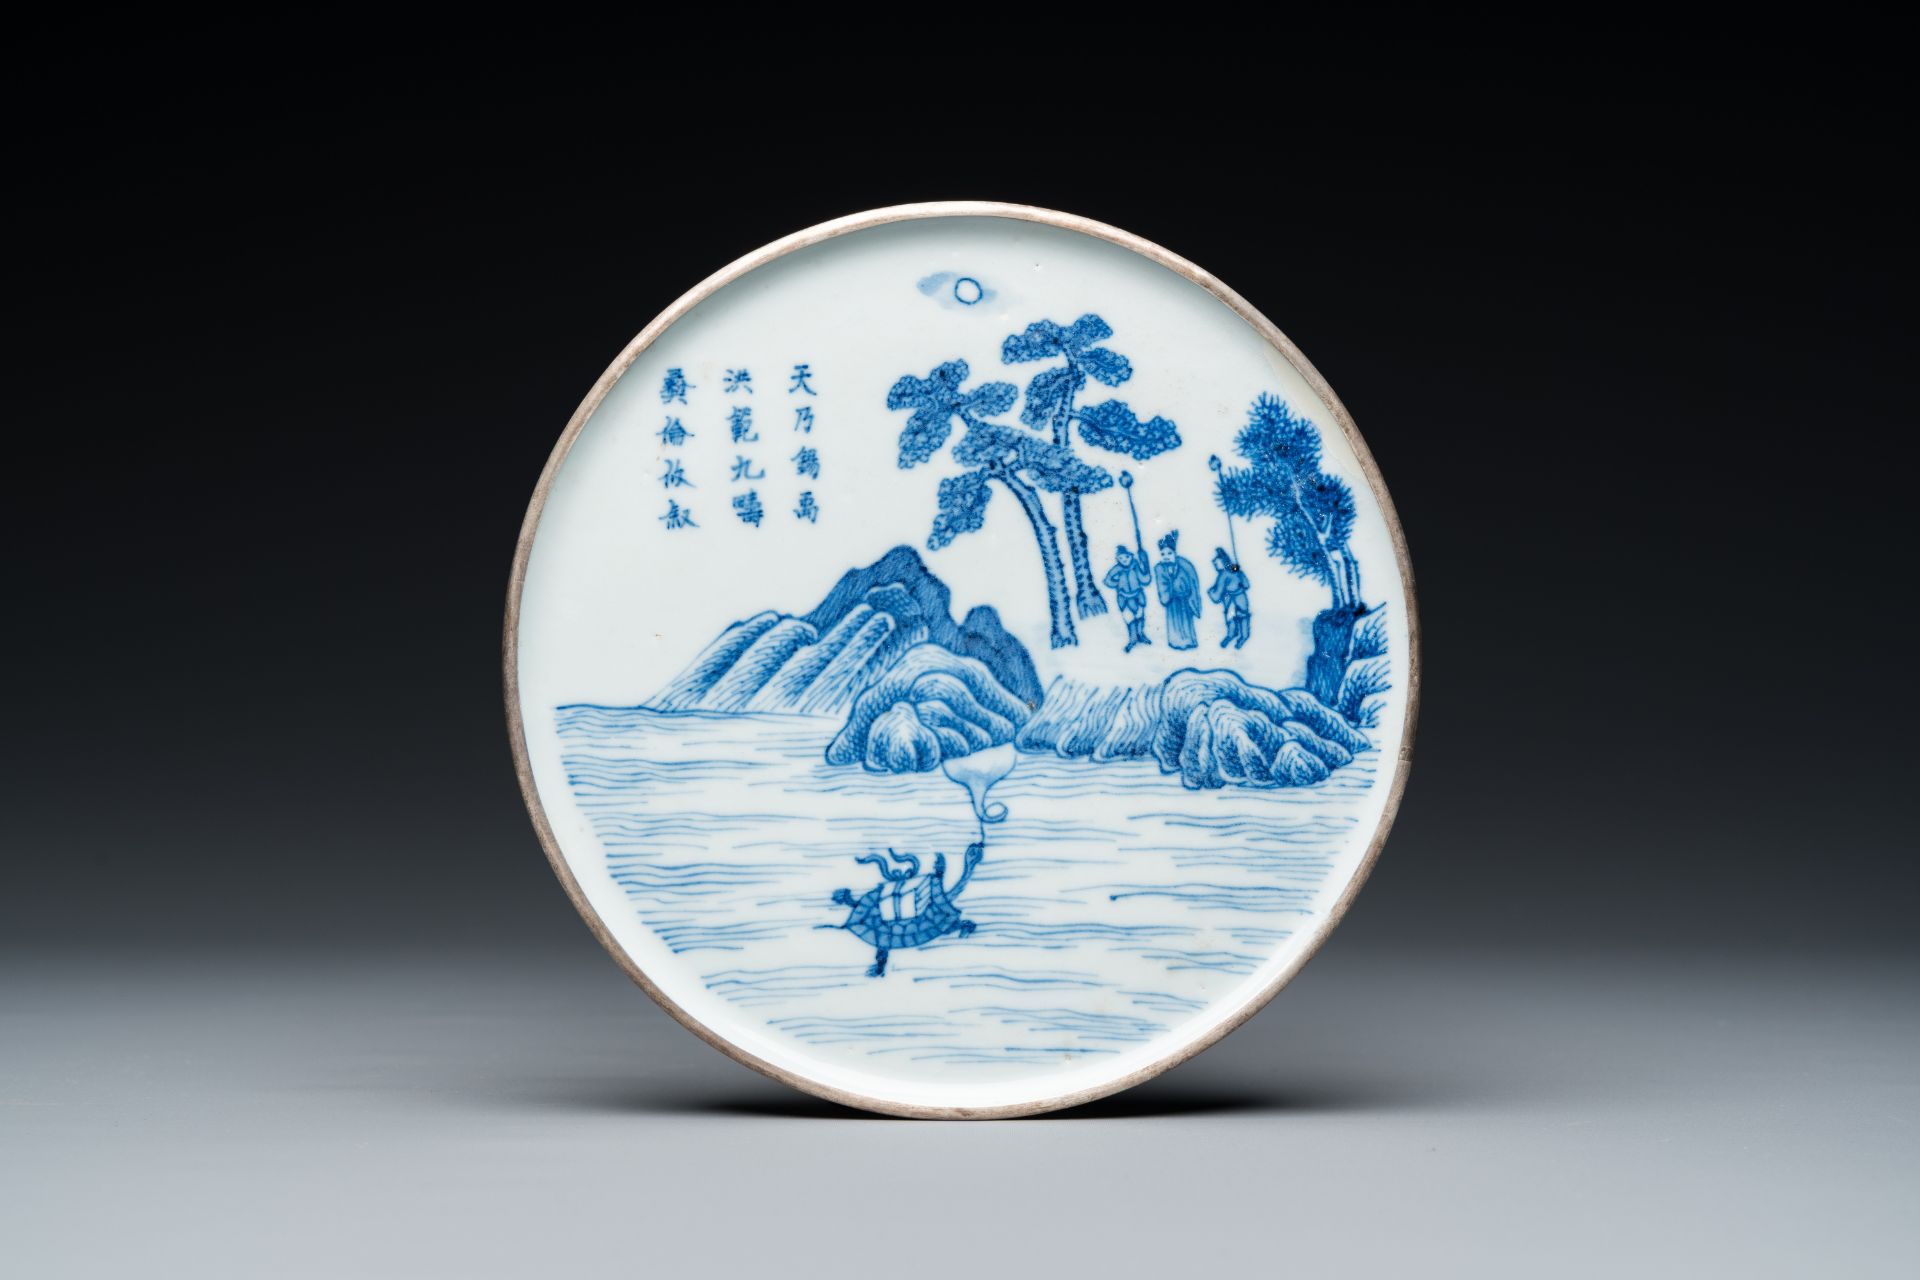 A rare Chinese 'Bleu de Hue' tea plate for the royal doctor in Hue Palace, 御醫正記 seal, mid-19th C.